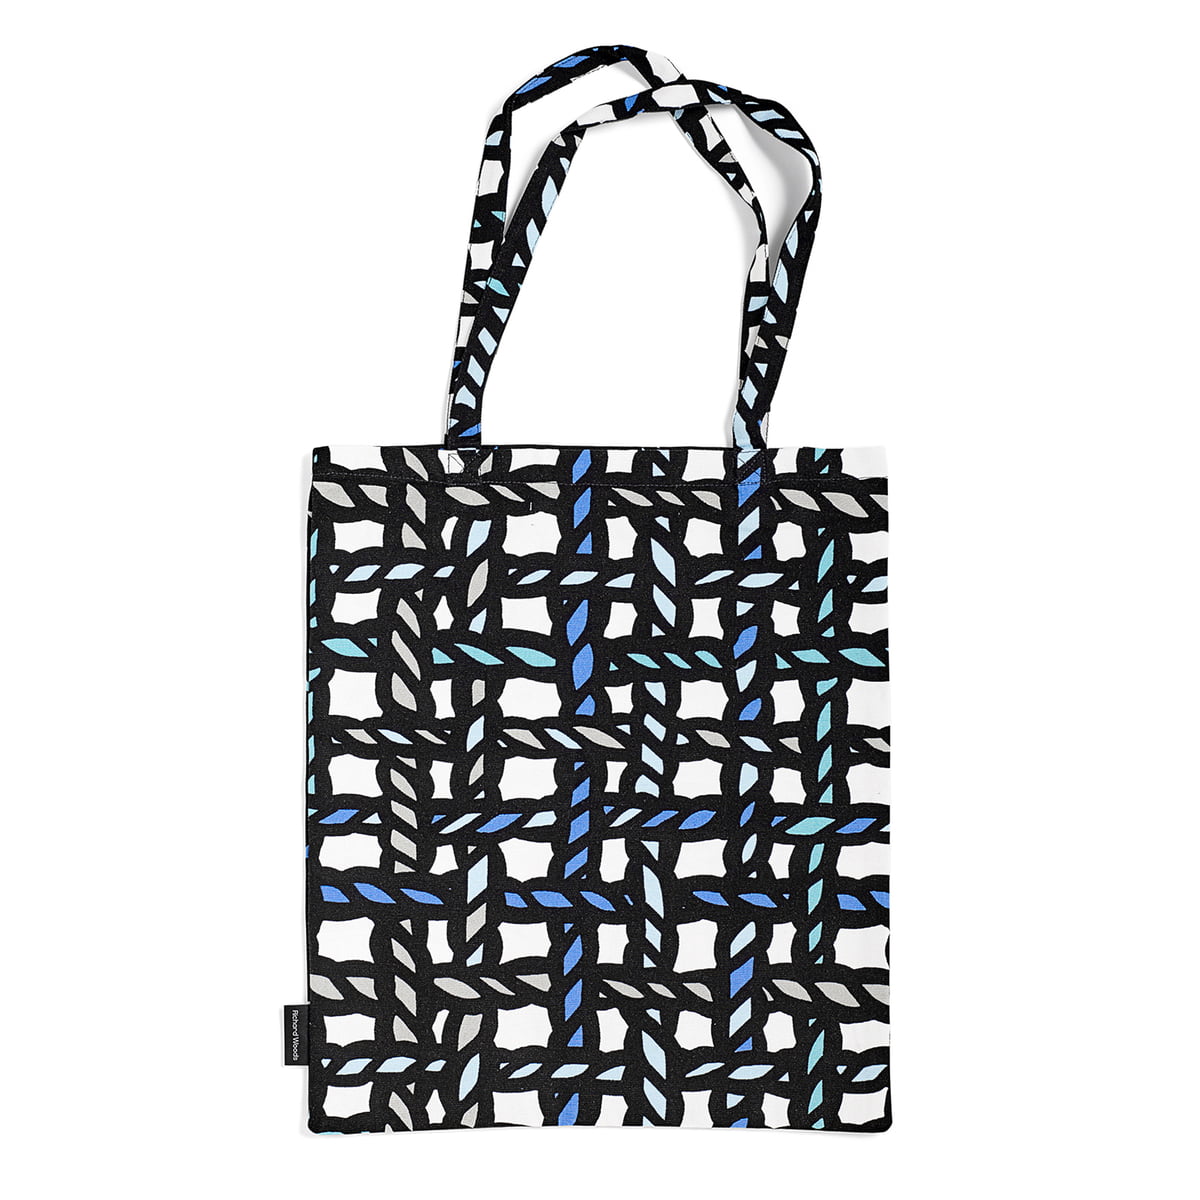 Tote Bag by RW from Hay online